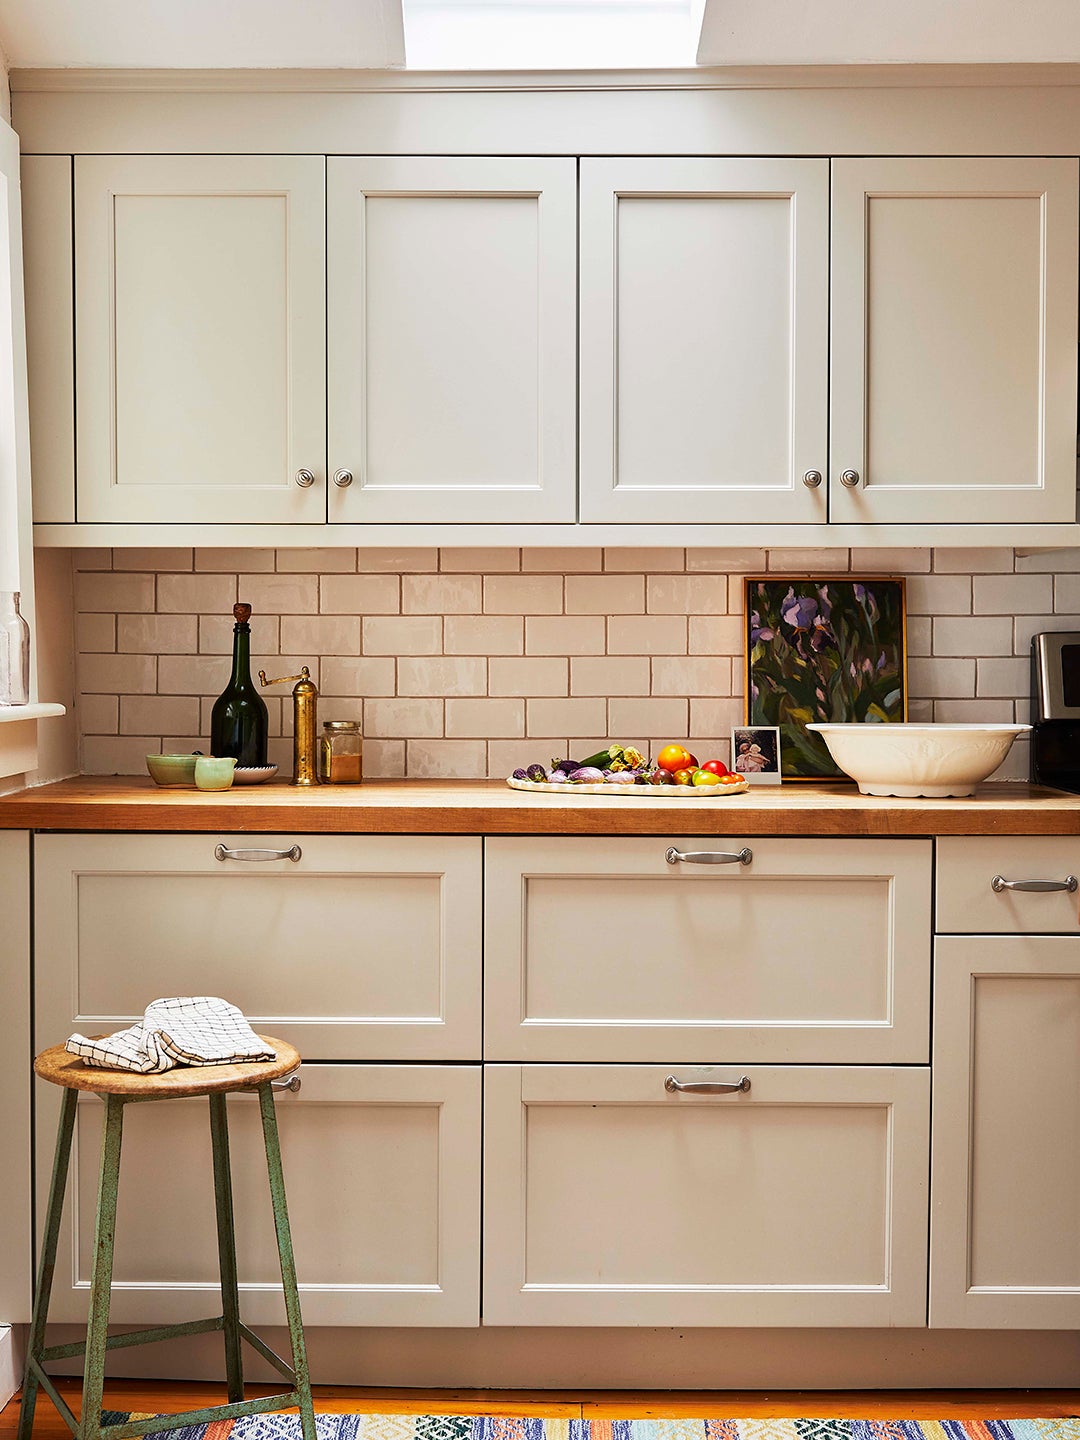 Beige kitchen cabinets and white subway tile